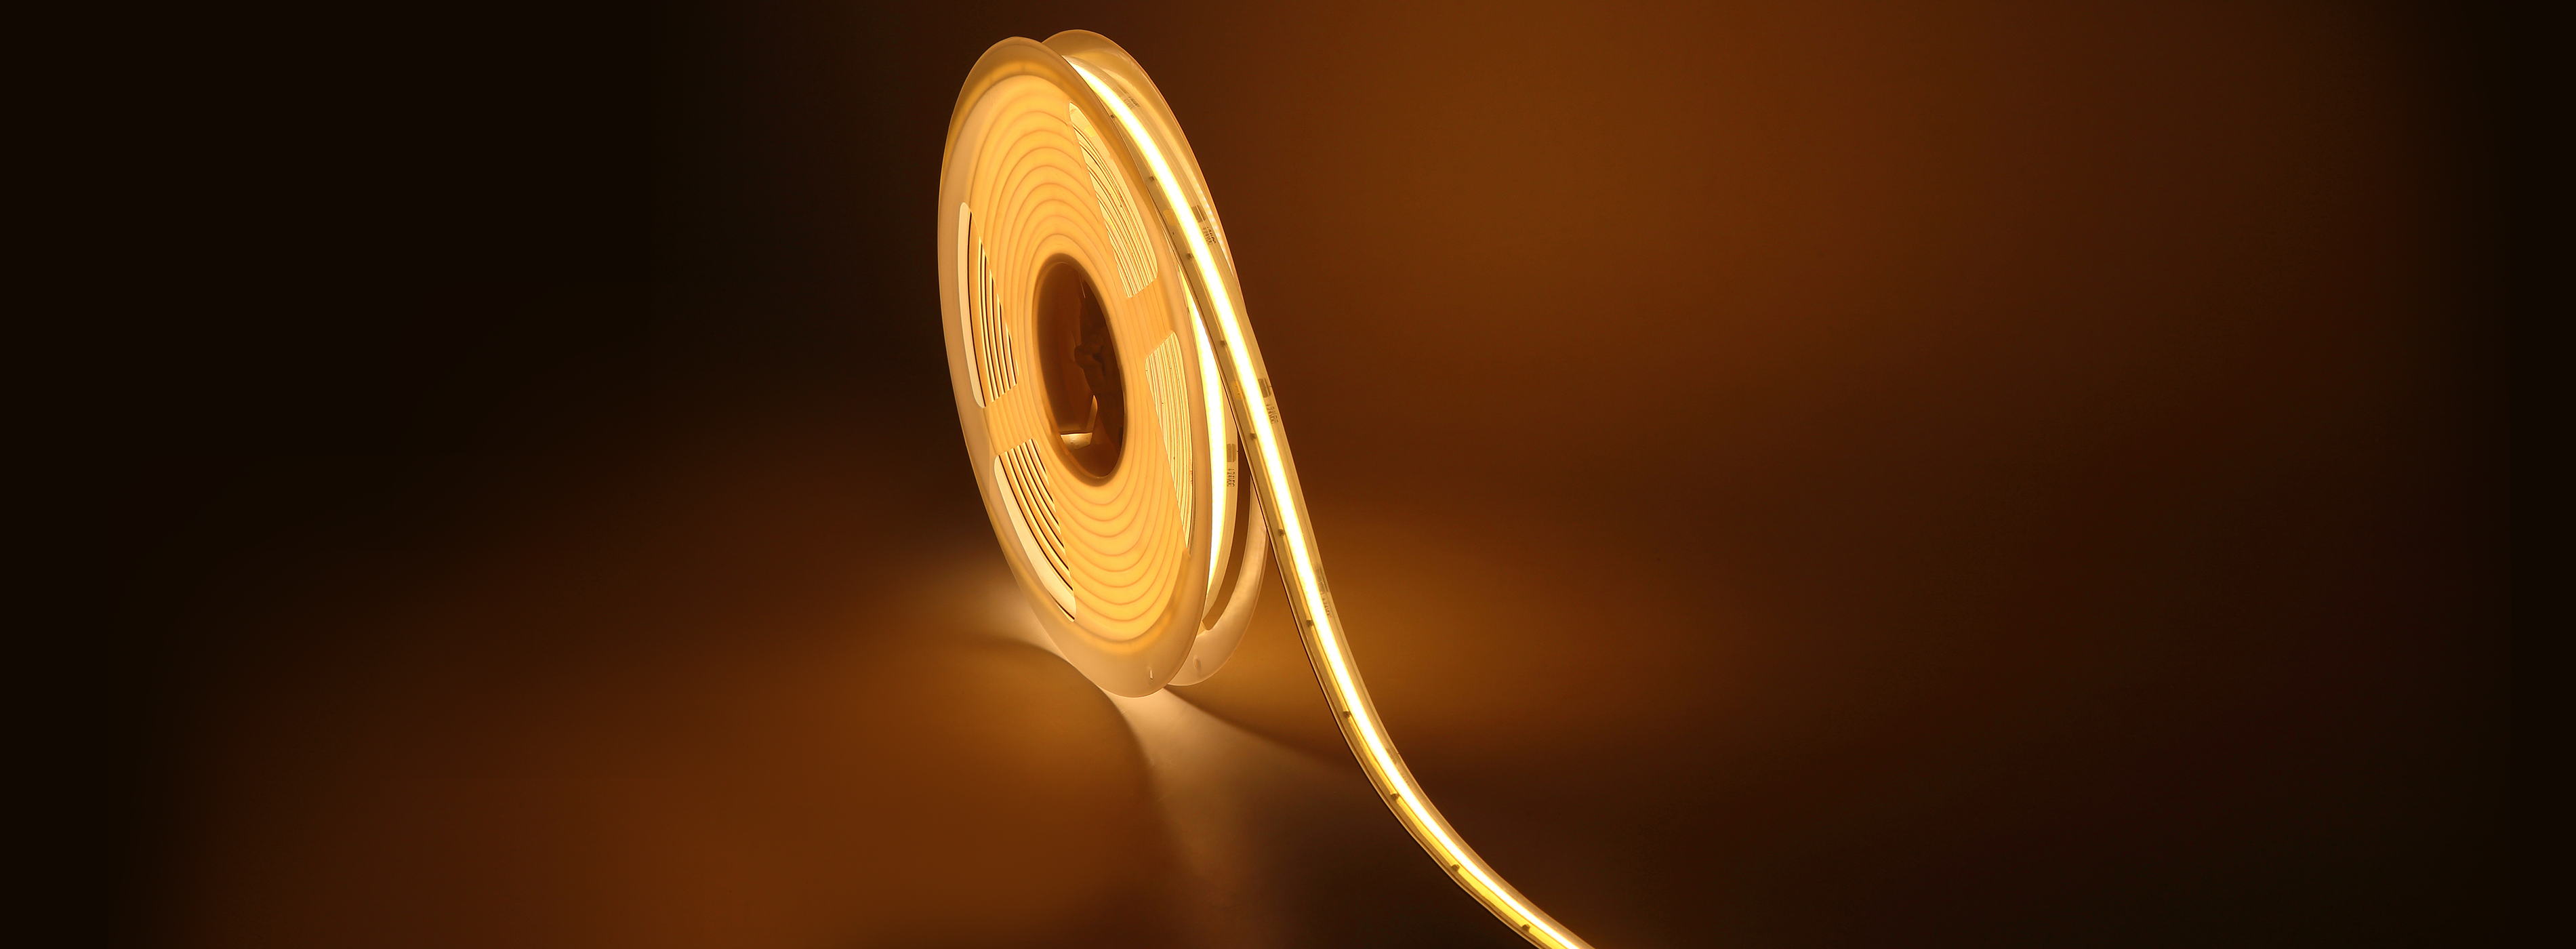 A wide panoramic image of a single strip of LED tape light curled loosely in the center against a dark background, emitting a warm golden glow that reflects off the surface beneath it.